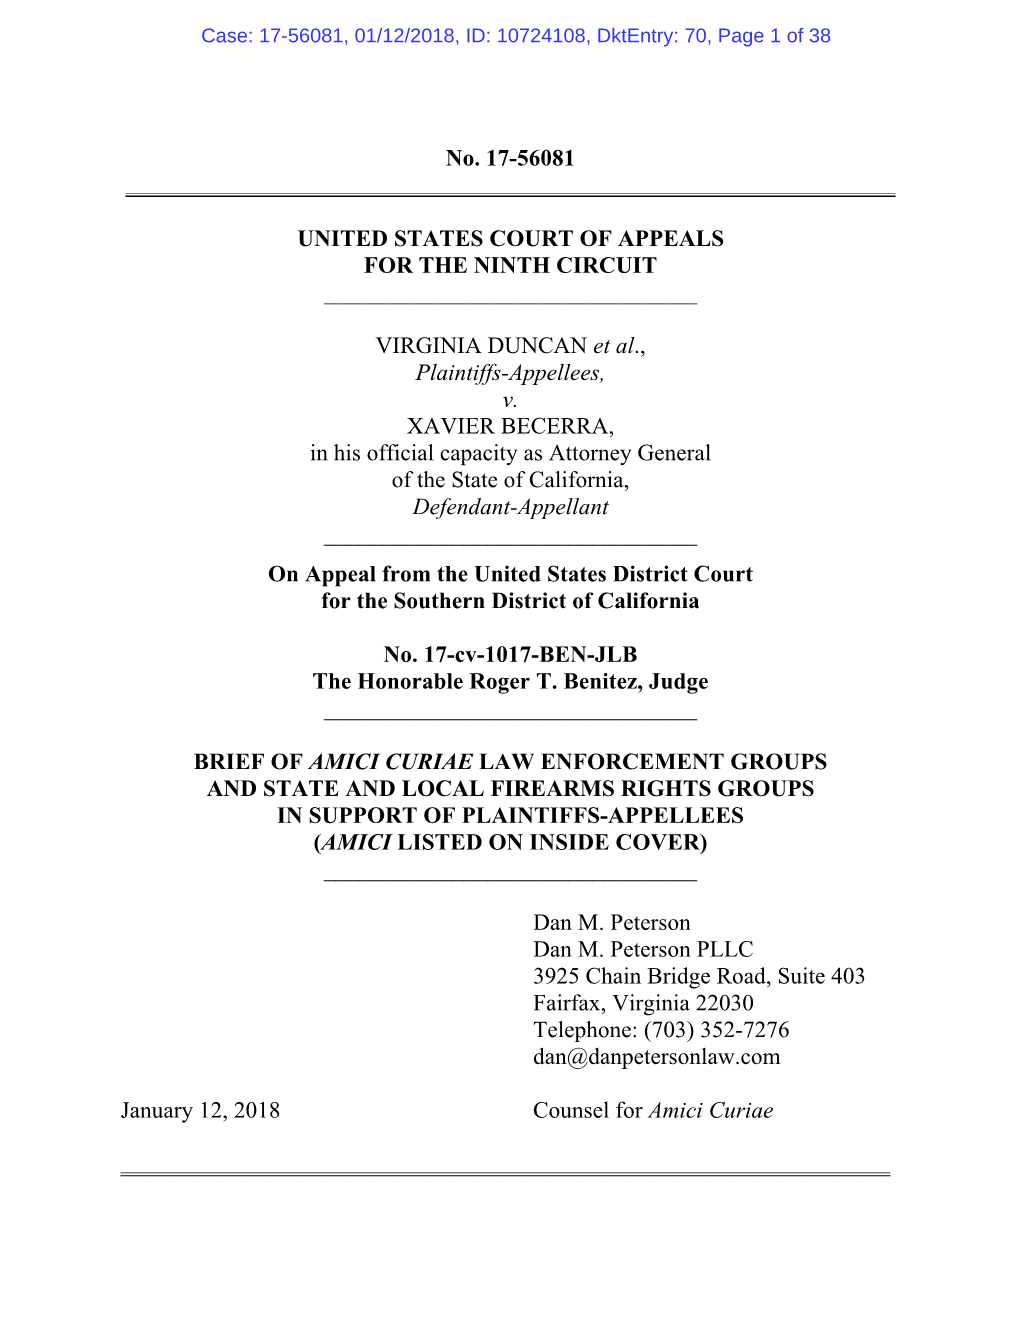 Brief of Amici Curiae Law Enforcement Groups and State and Local Firearms Rights Groups in Support of Plaintiffs-Appellees (Amici Listed on Inside Cover) ______